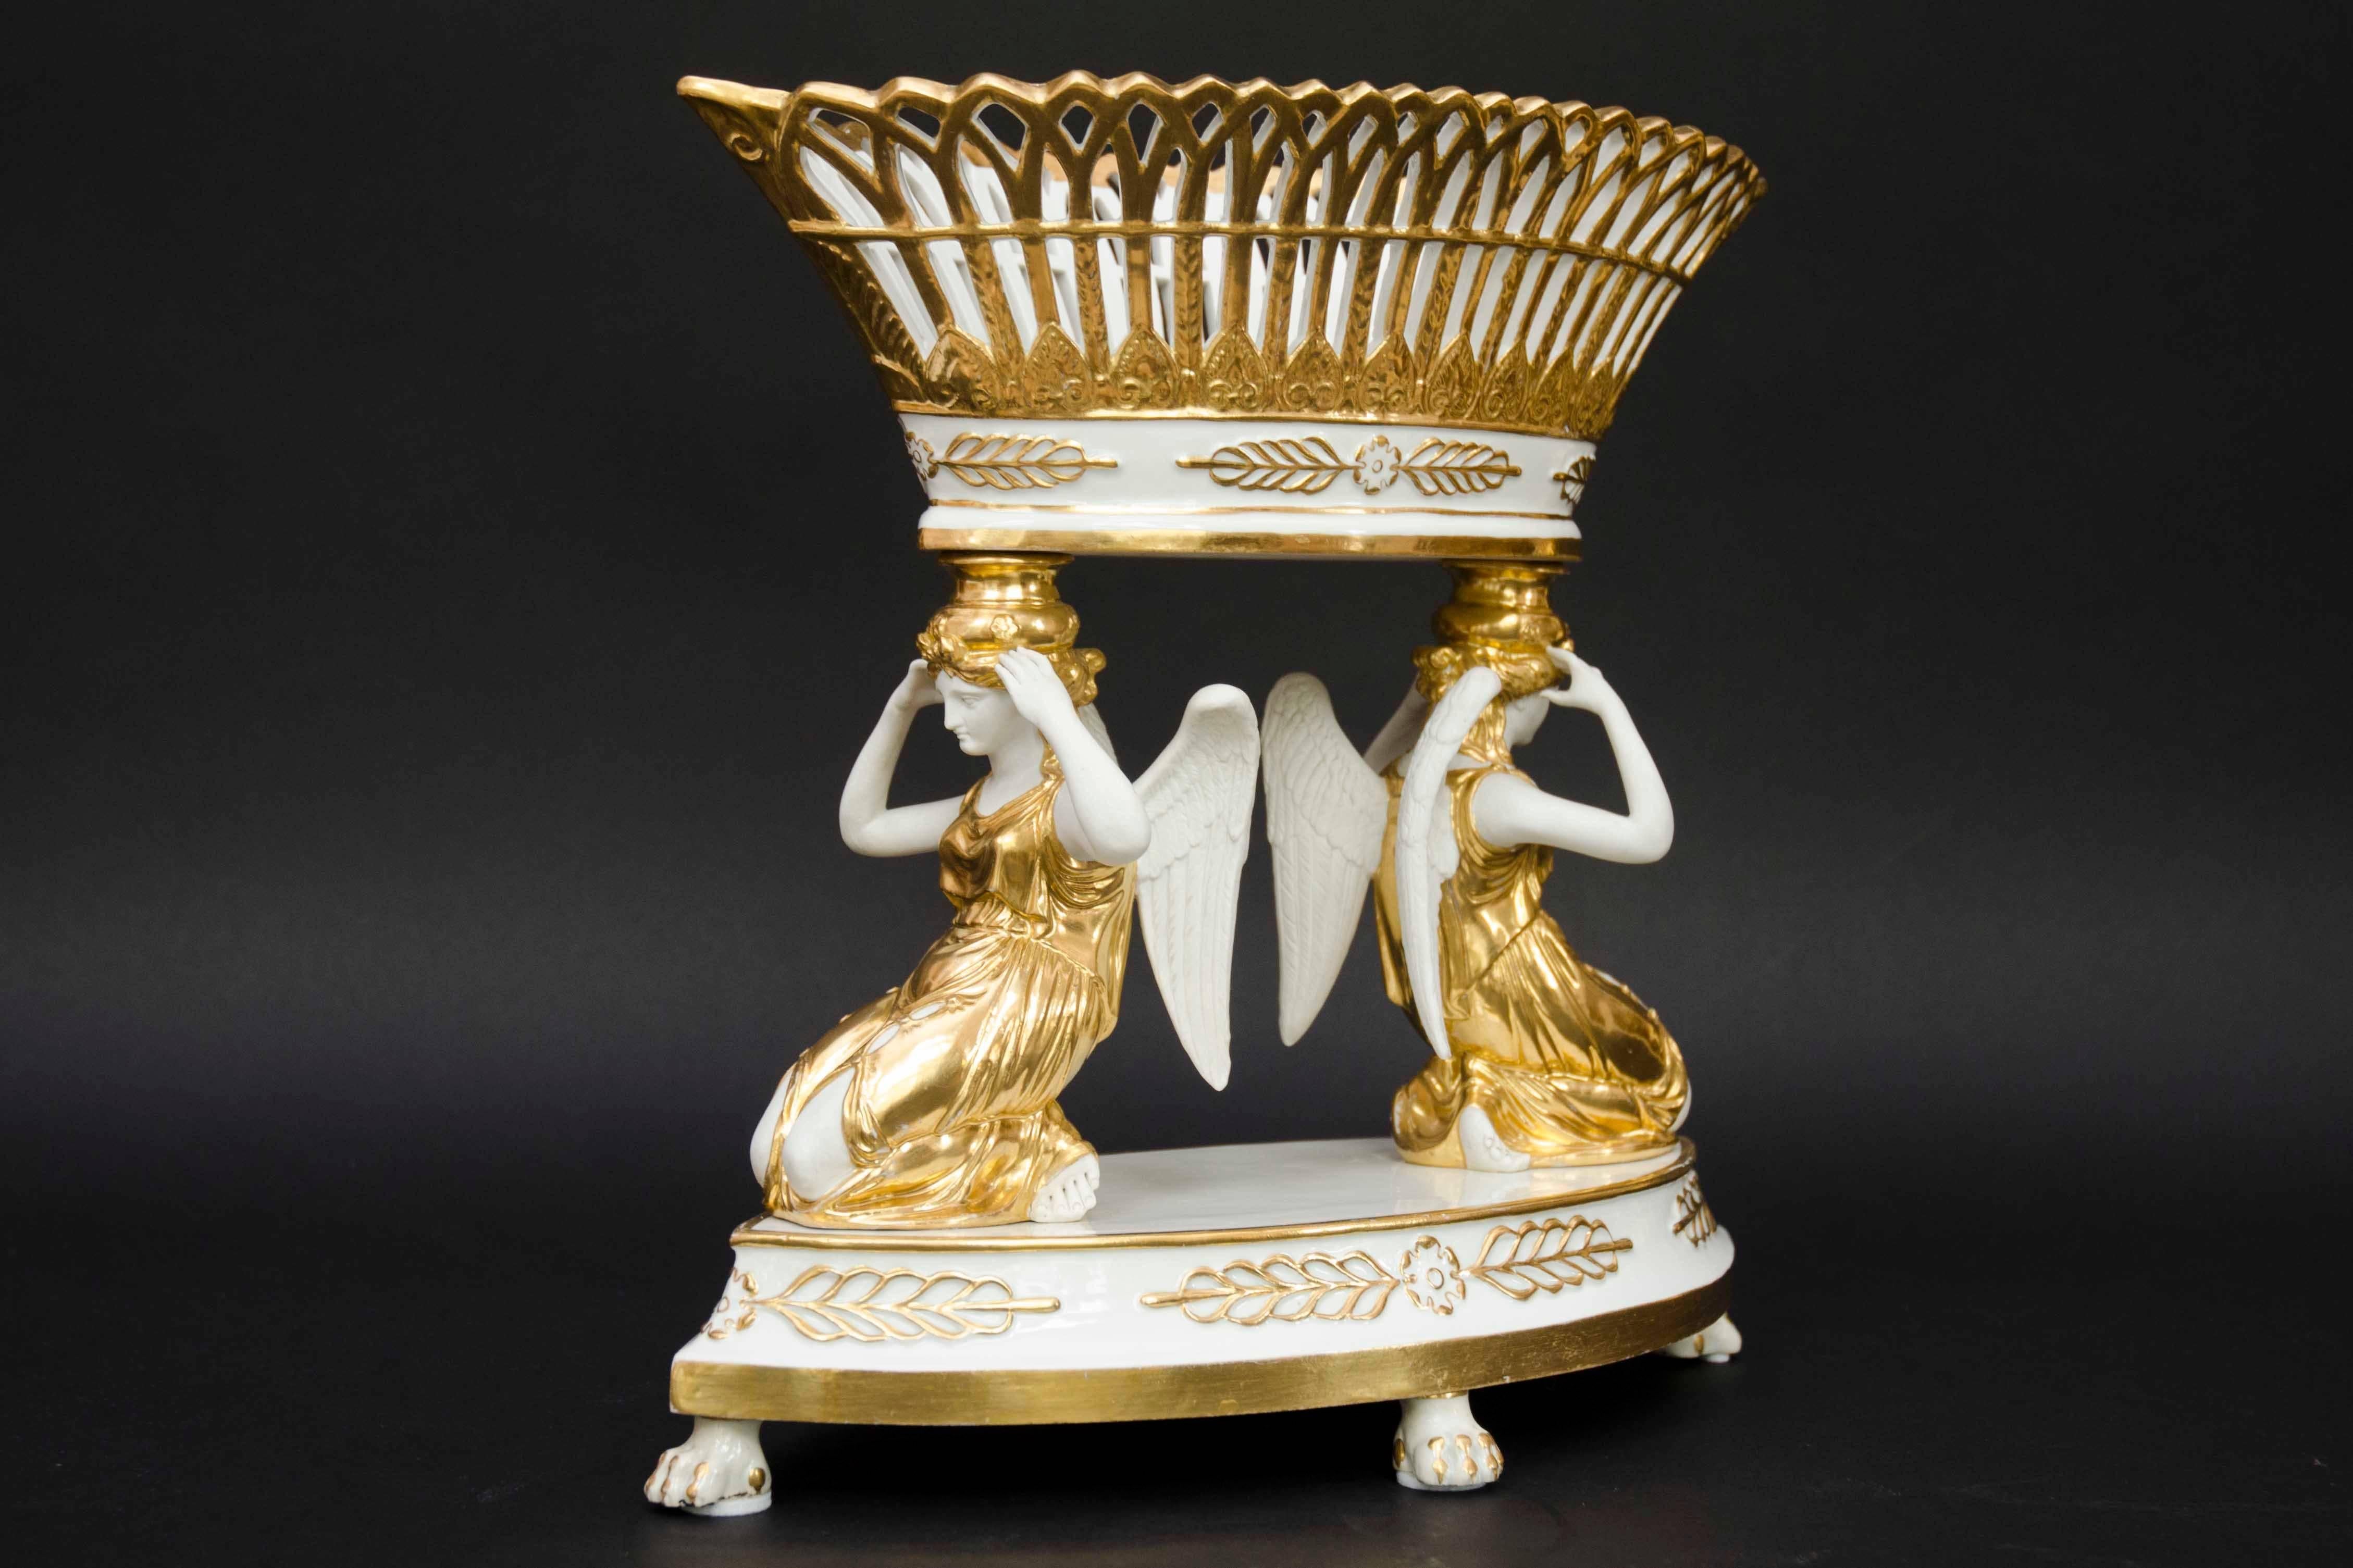 Large porcelain open worked fruit basket in the Empire style held by a couple of winged women. Oval shape, women kneeling down with their arms holding the basket on their heads. The figures are in bisque. Highlights in gold on the porcelain and the